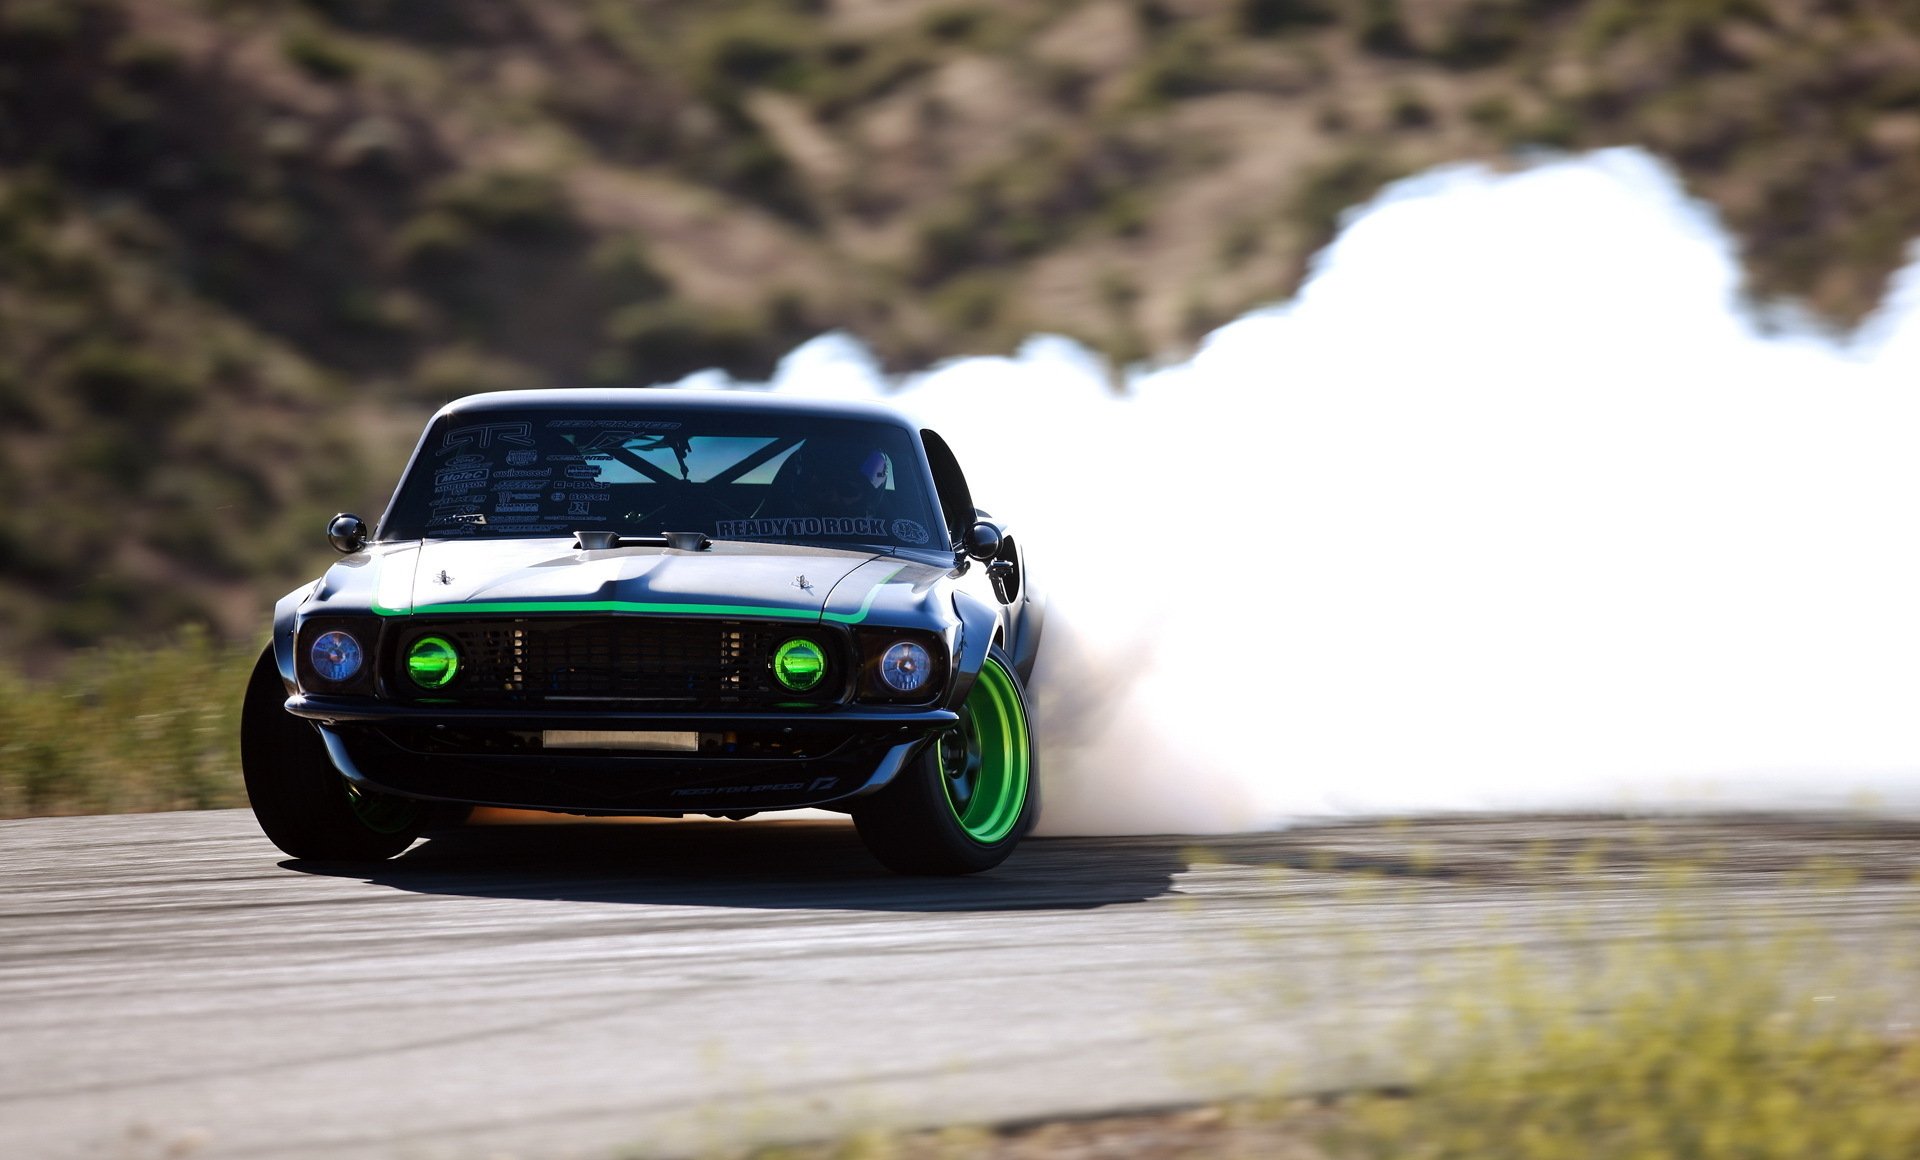 Car Drifting Wallpapers For Android